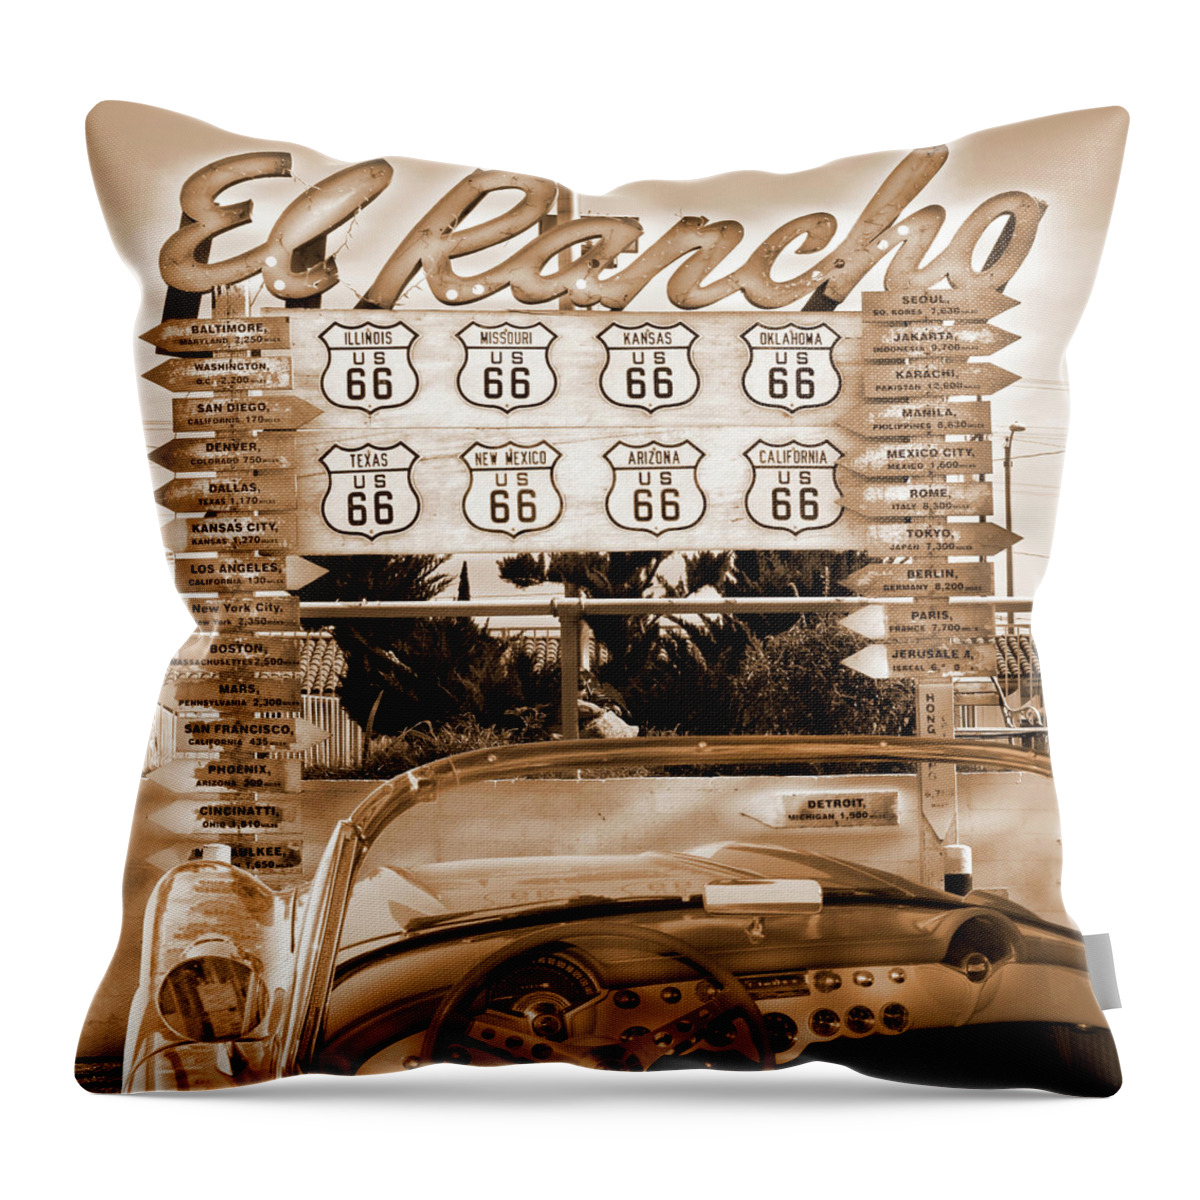 Classic Signs Throw Pillow featuring the photograph Route 66 El Rancho Sign by Mike McGlothlen